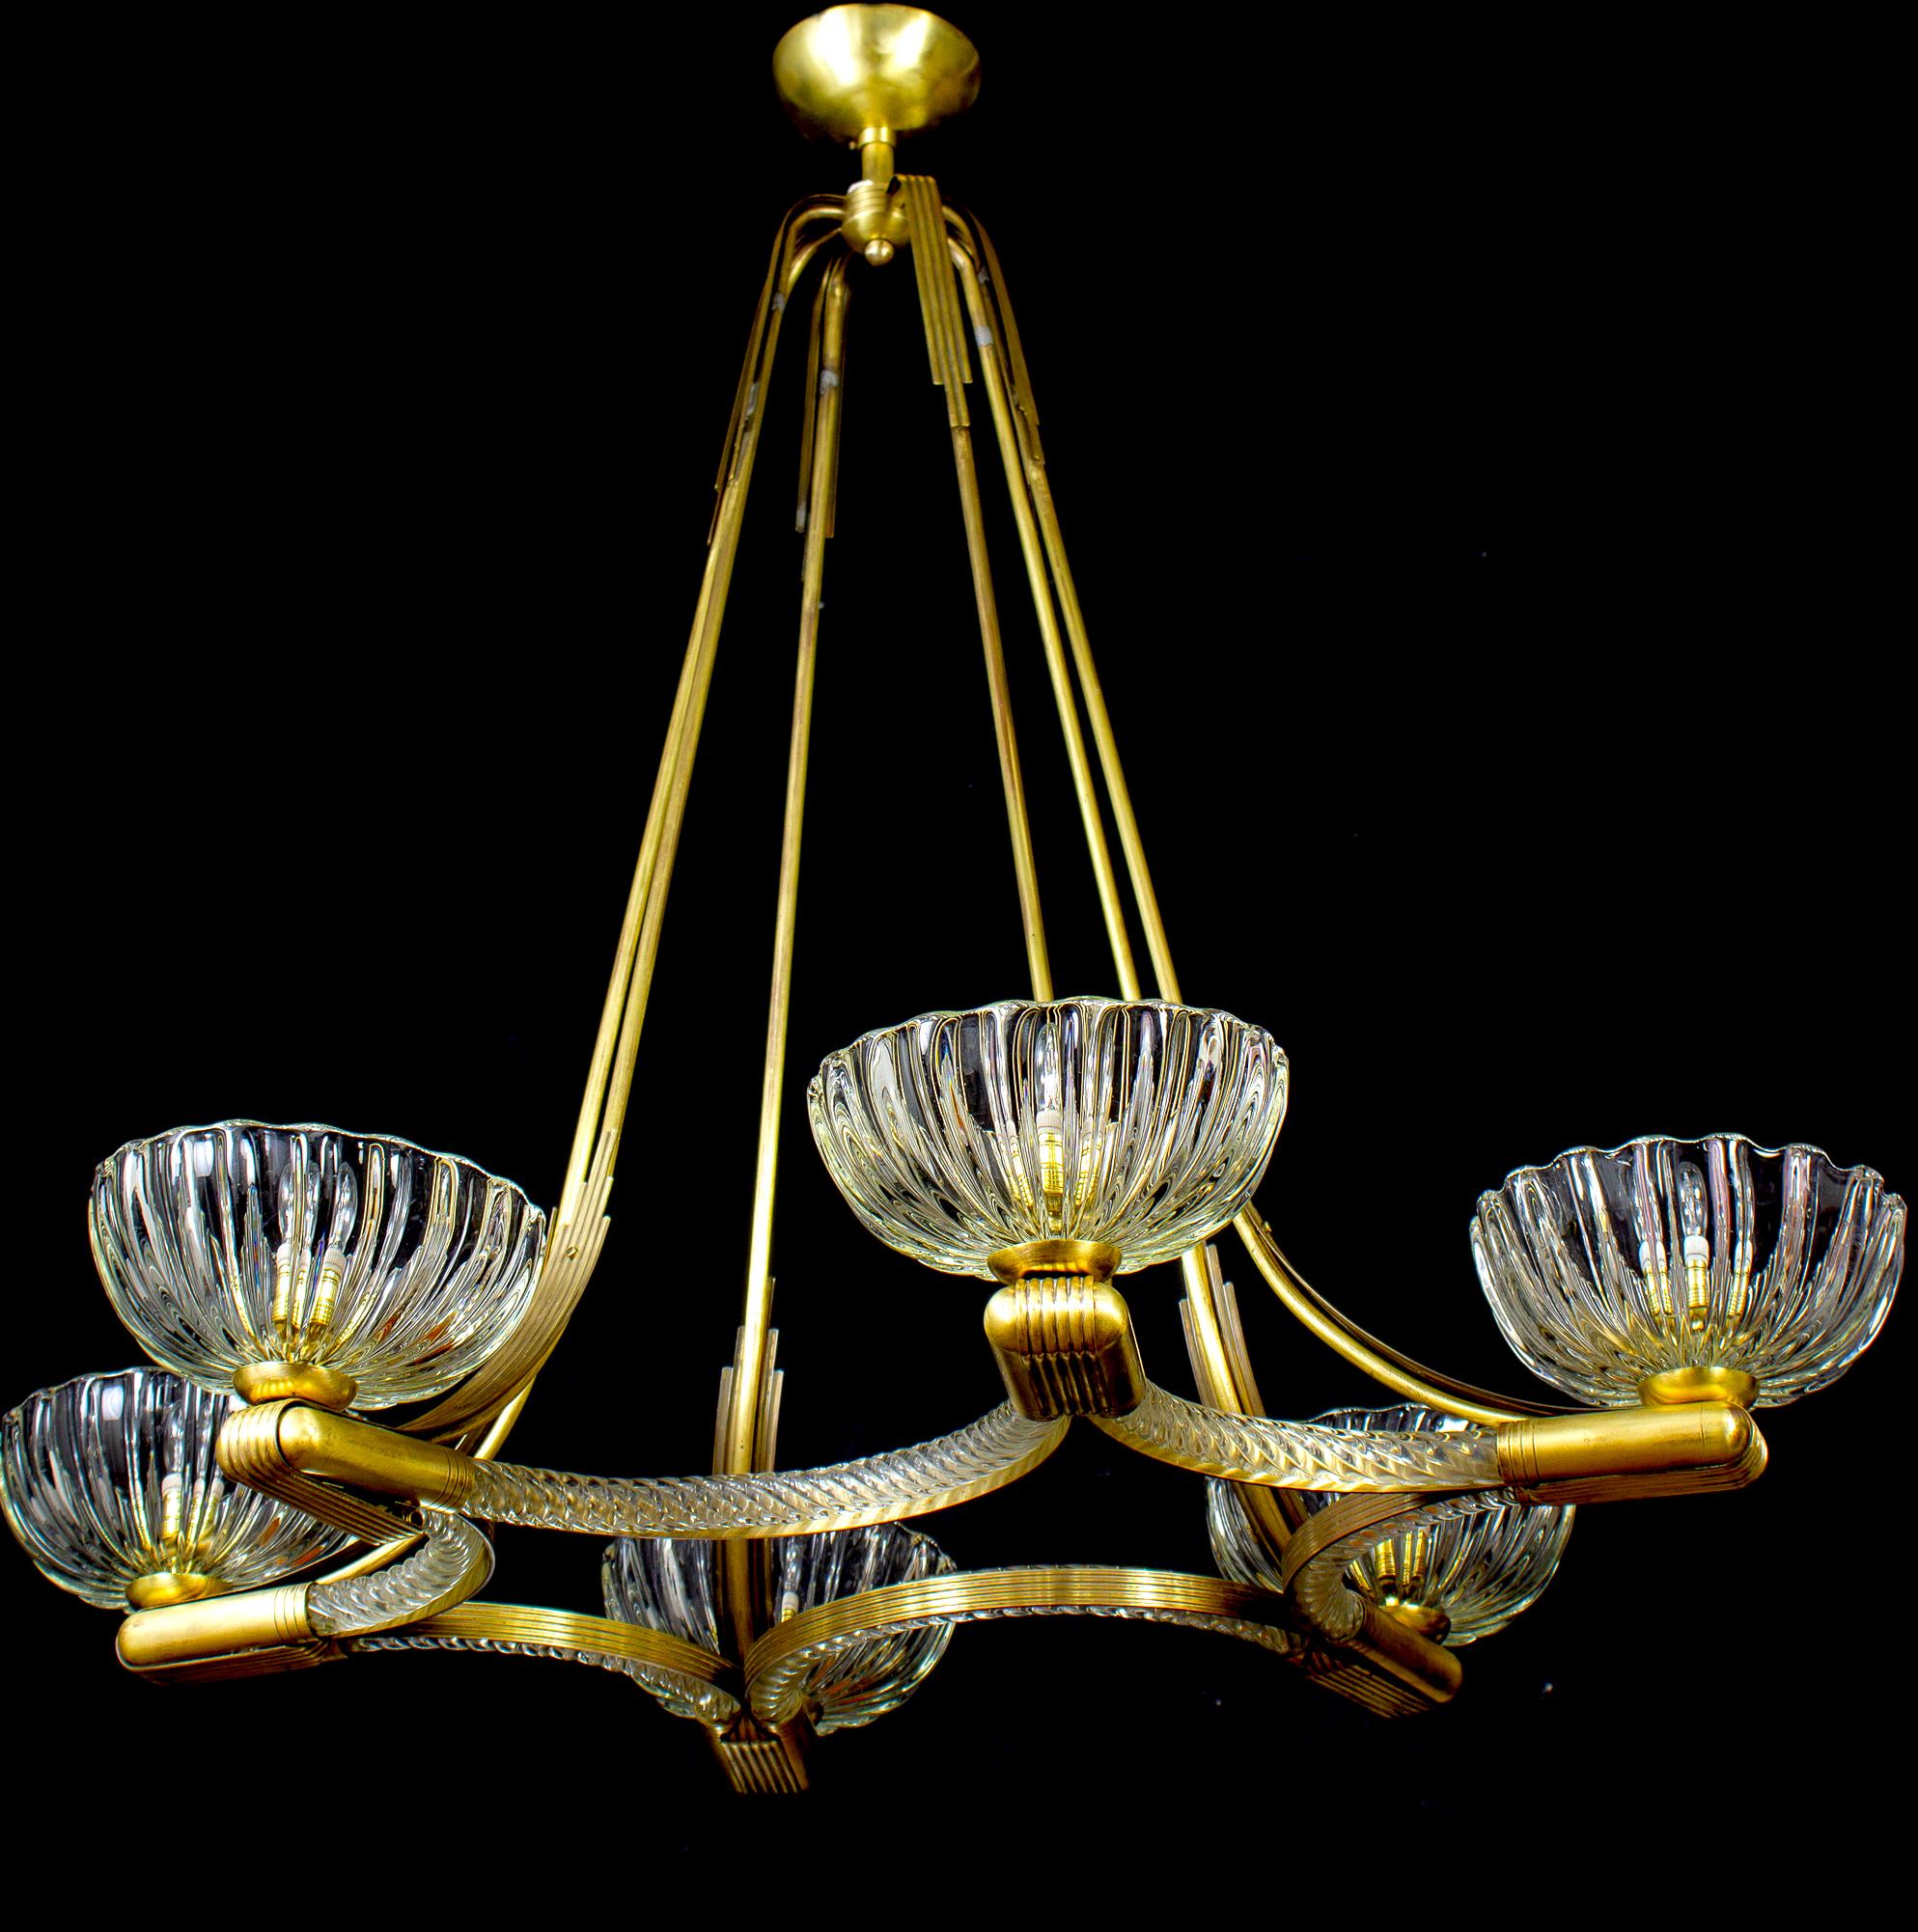 Exceptional six -shade Murano glass chandelier with elegant shaped brass mount, by Ercole Barovier.
Excellent vintage condition.
Six E 27 light bulbs compatible with US standards.